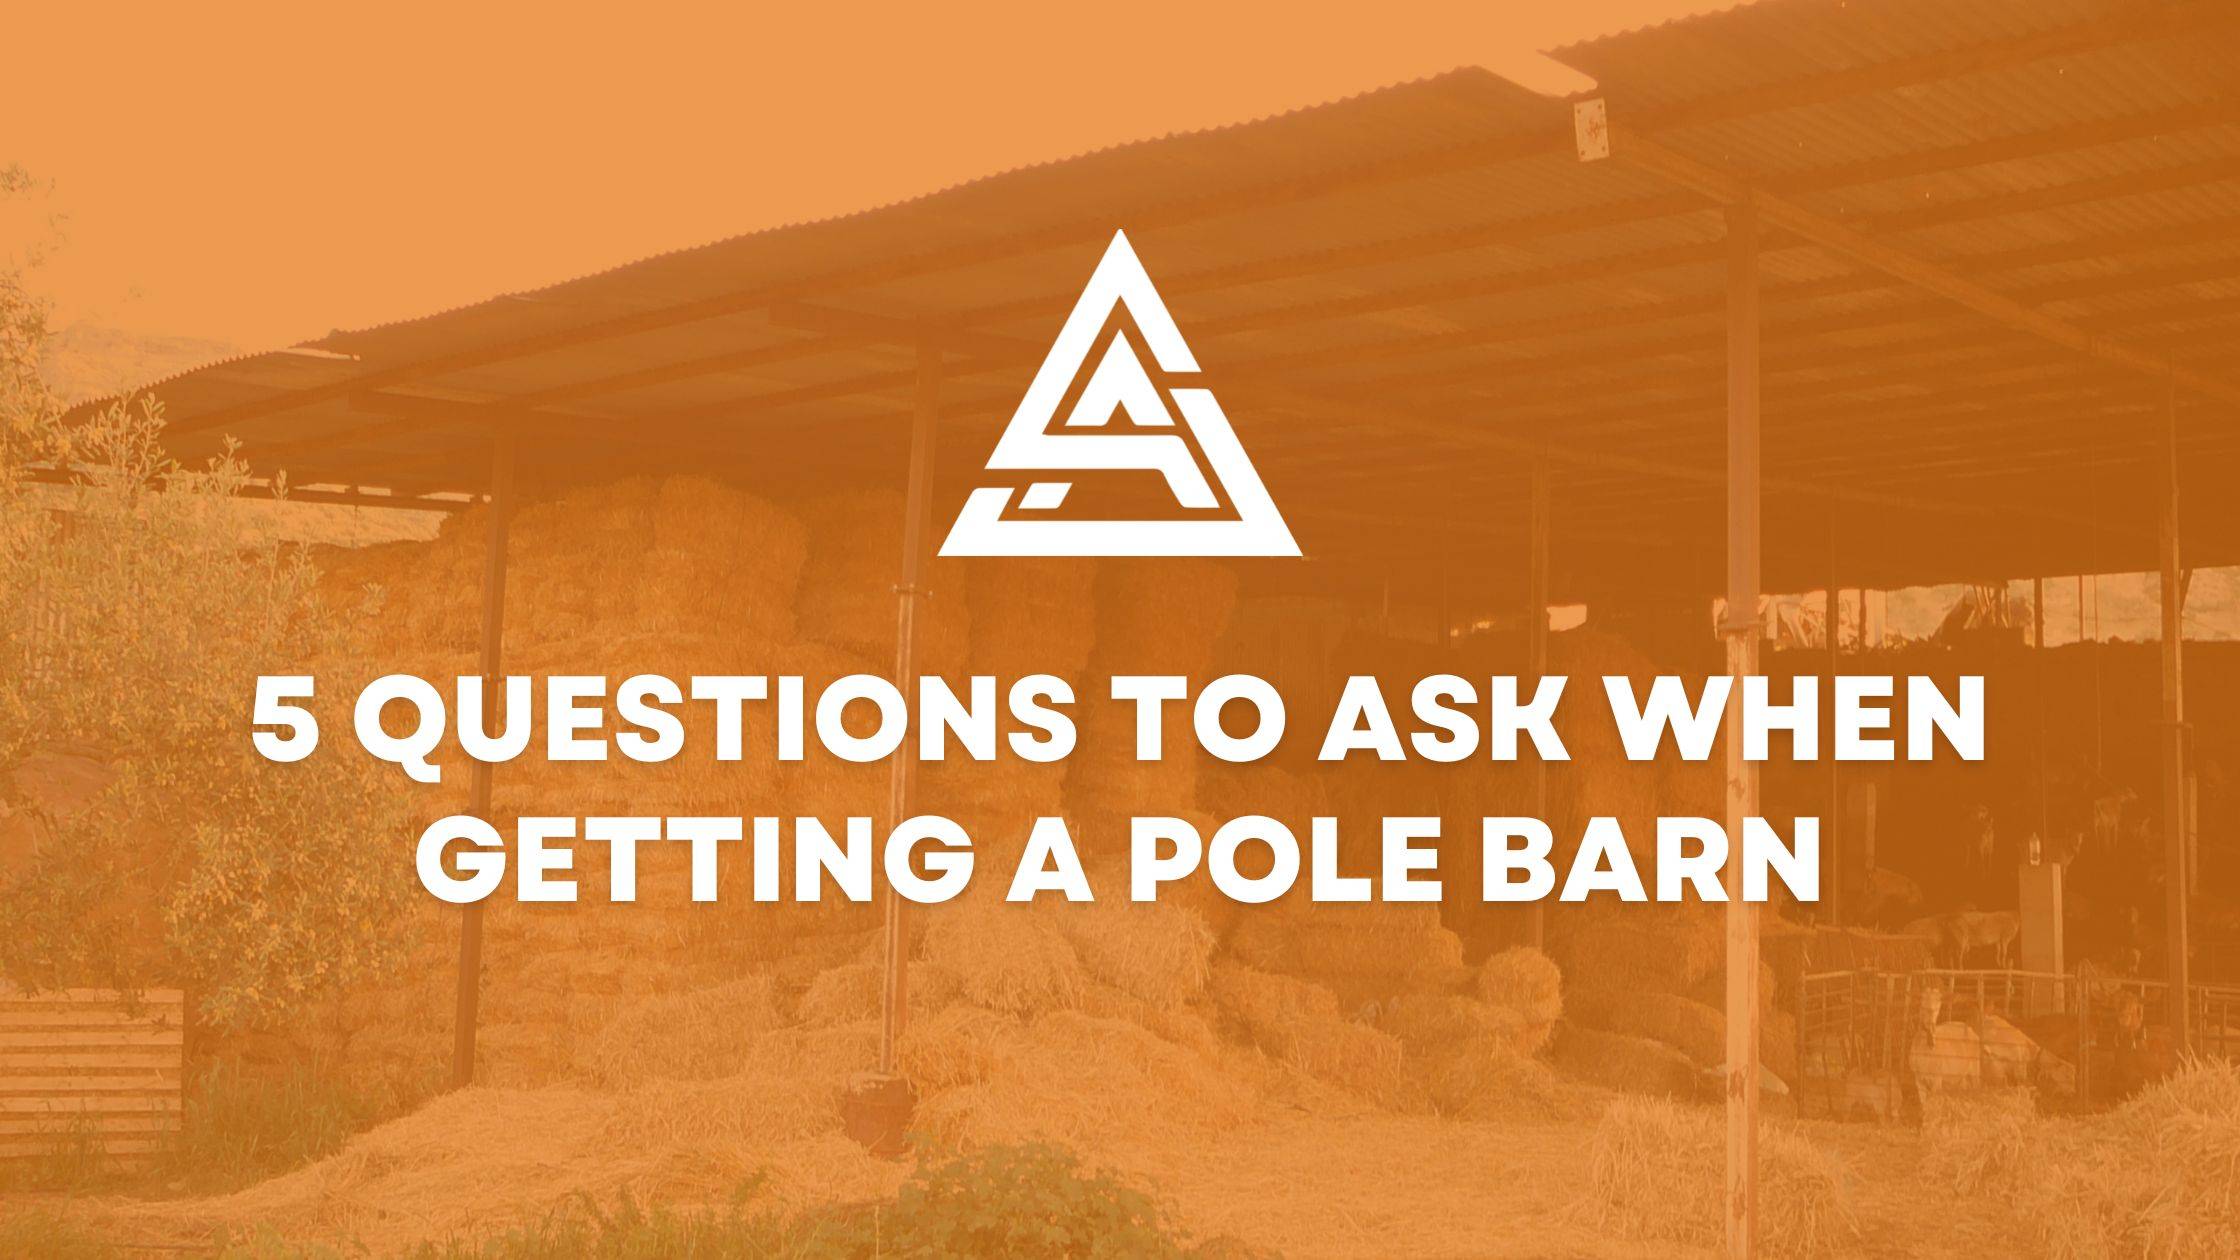 5 Questions to Ask When Getting a Pole Barn